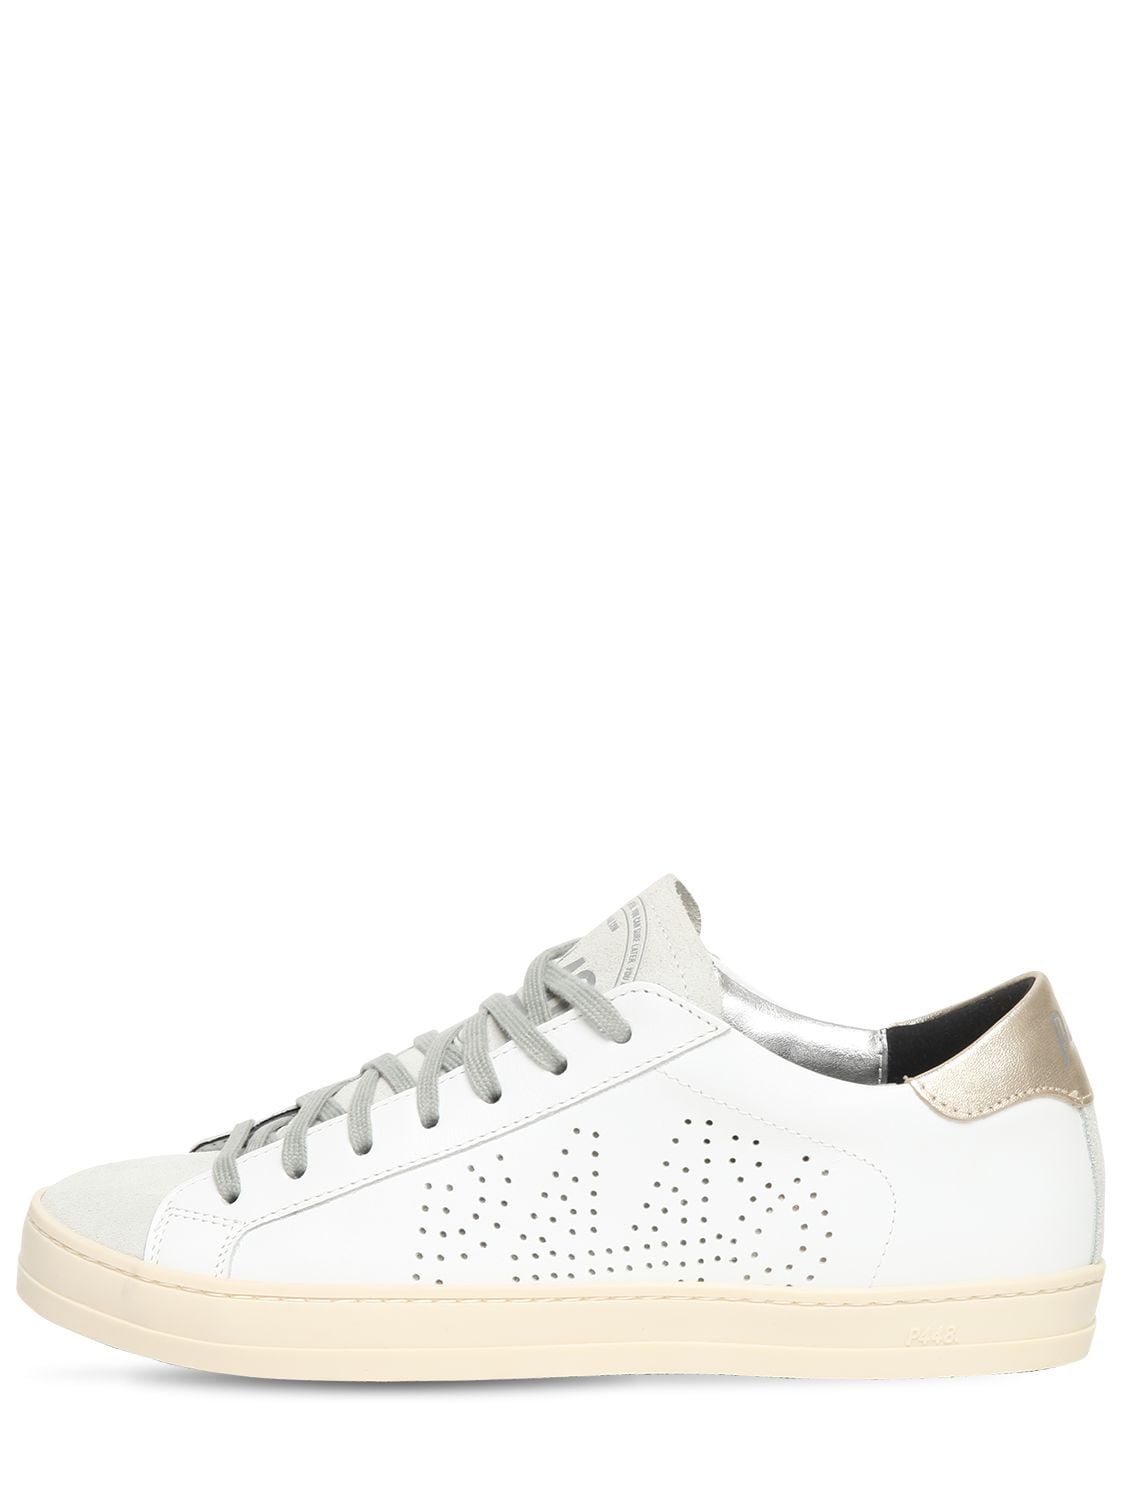 P448 20MM JOHN LEATHER & SUEDE trainers,72IMUH001-V0HJL1BMQQ2